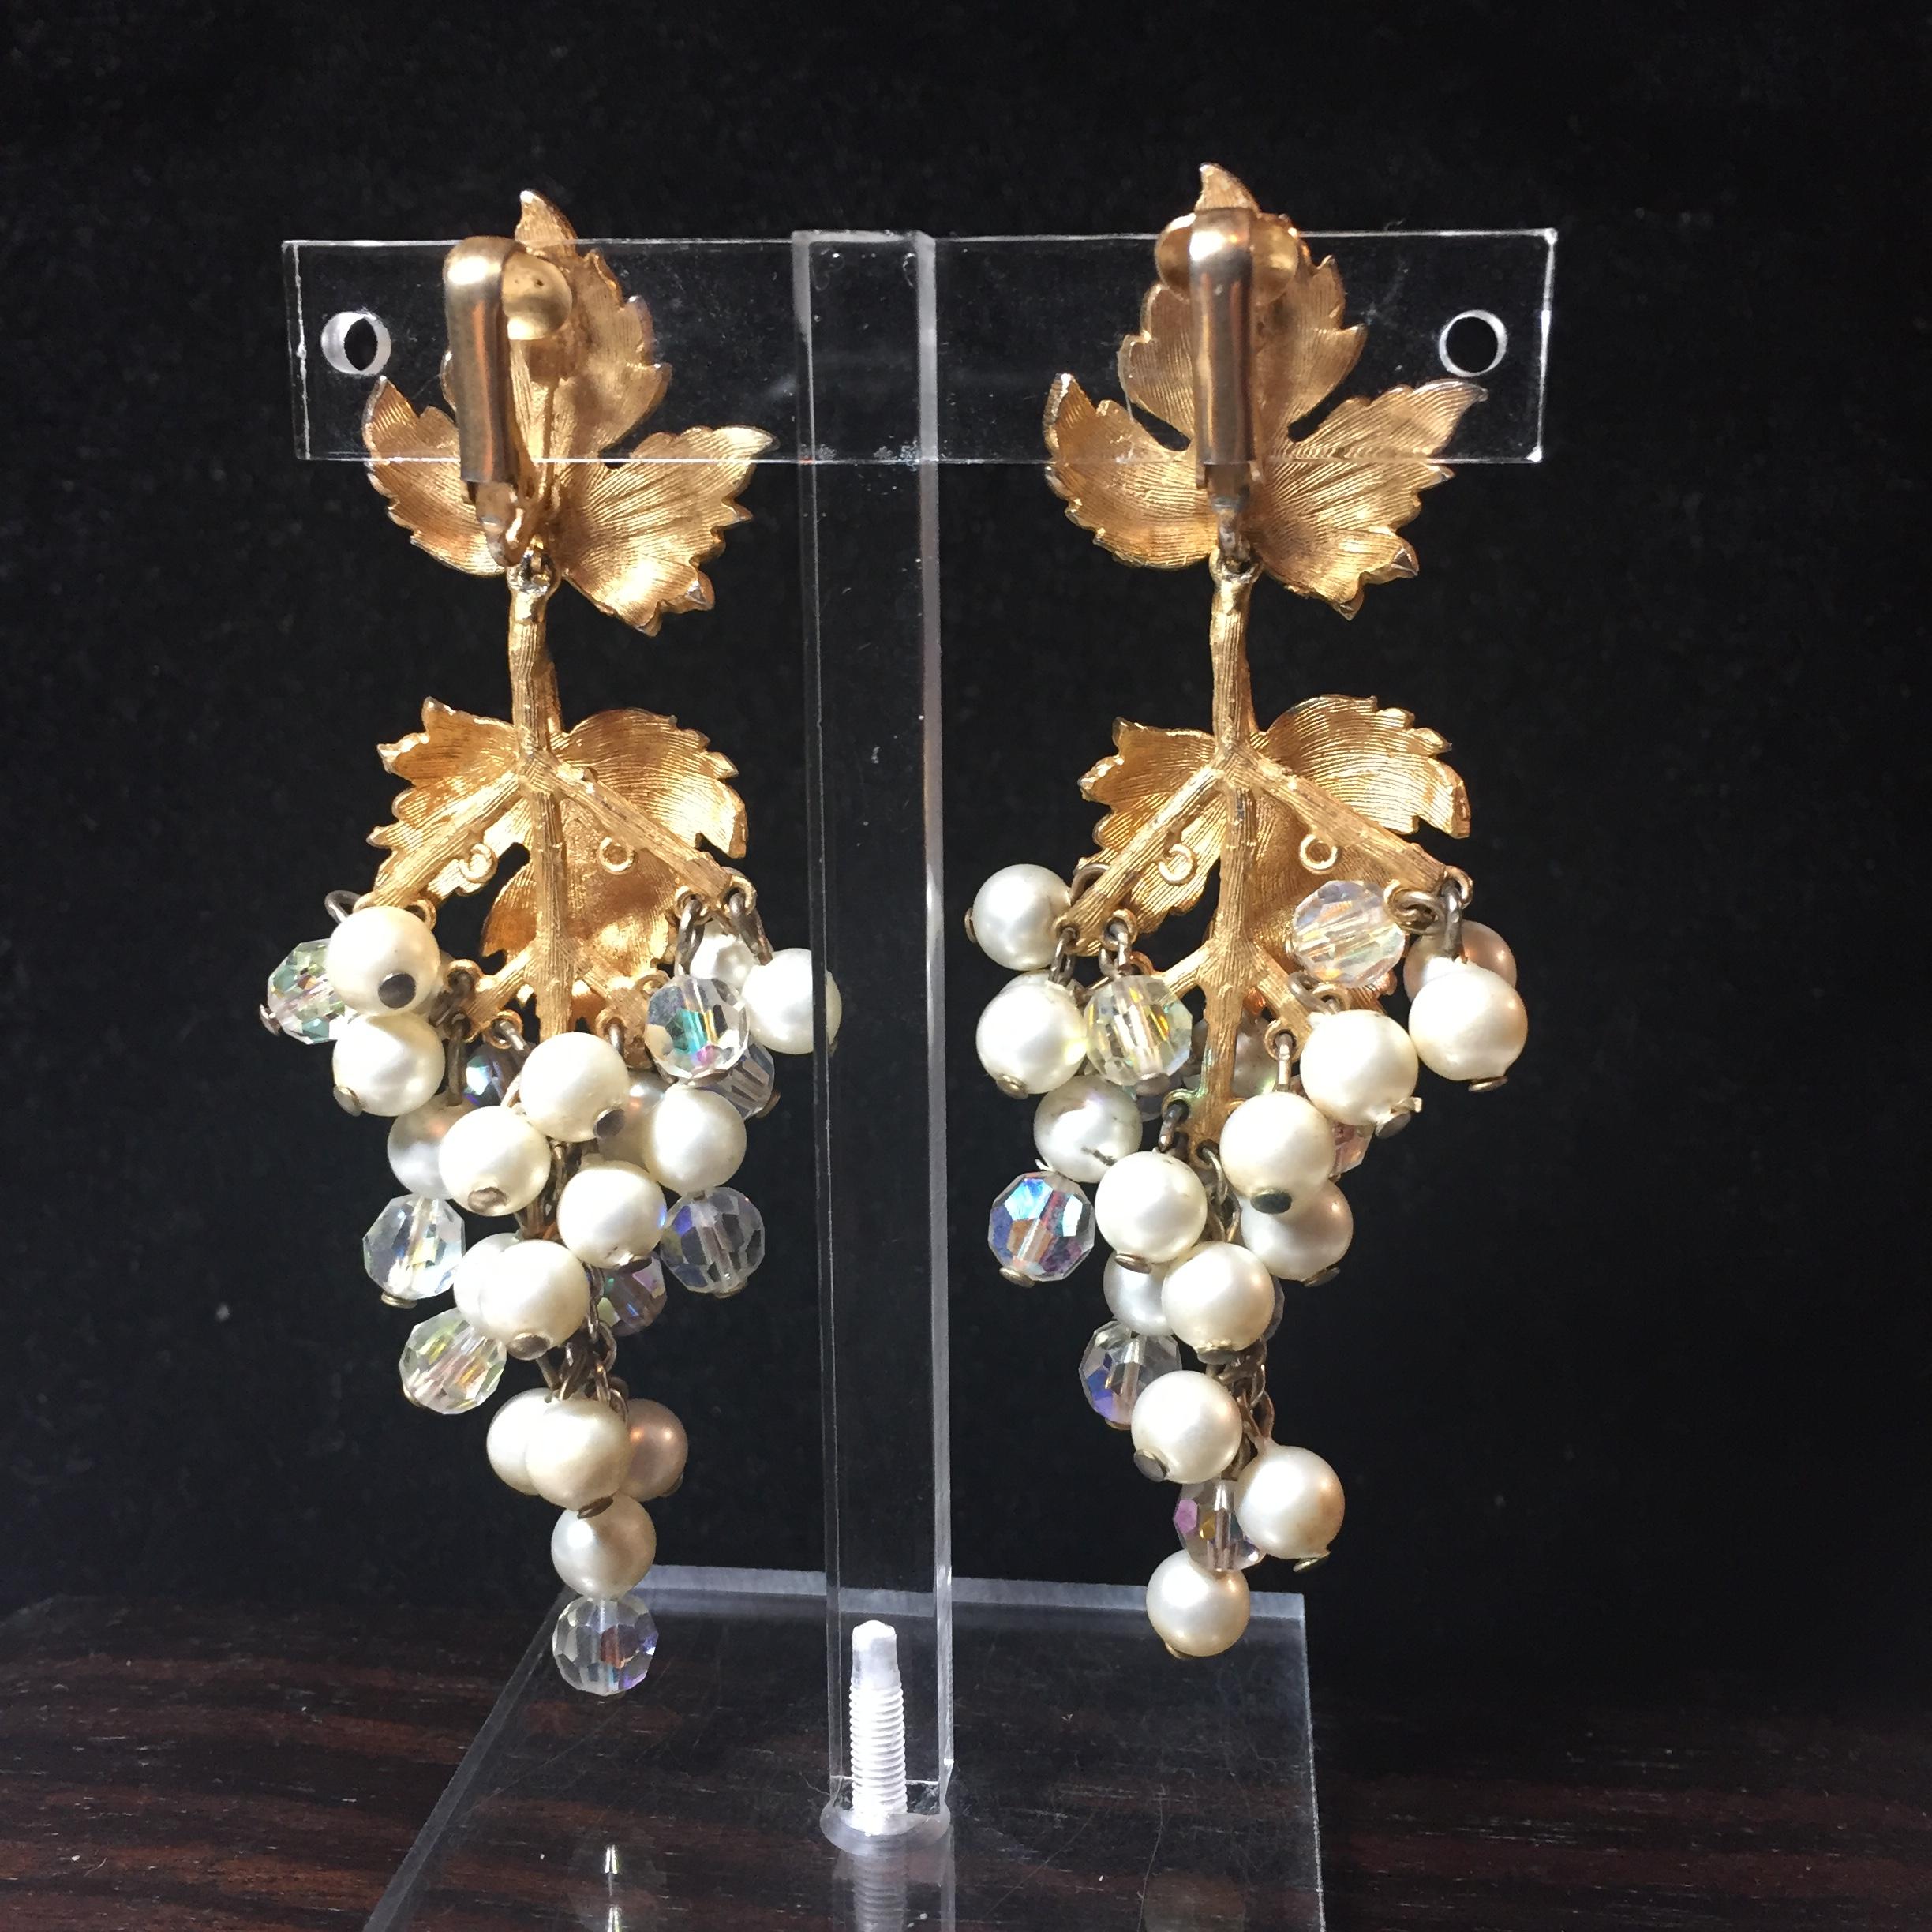 Offered here is a pair of Mid-Century gold-plated dangling clip-back earrings from the 1950s. On the ear is a meticulously detailed grape leaf; dangling from this is another leaf atop a branched structure, from which are suspended multiple glass